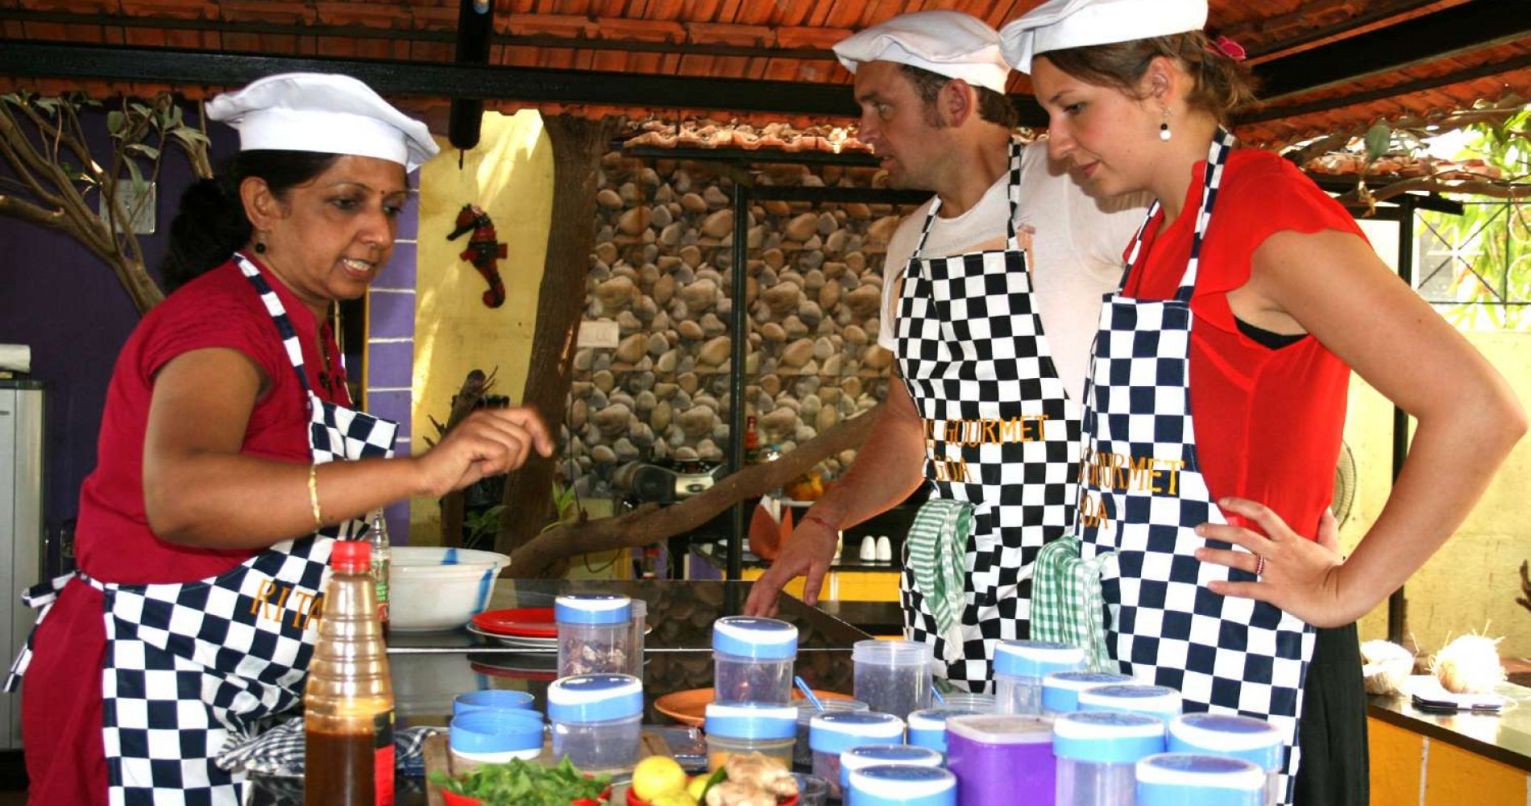 india cookery class experience